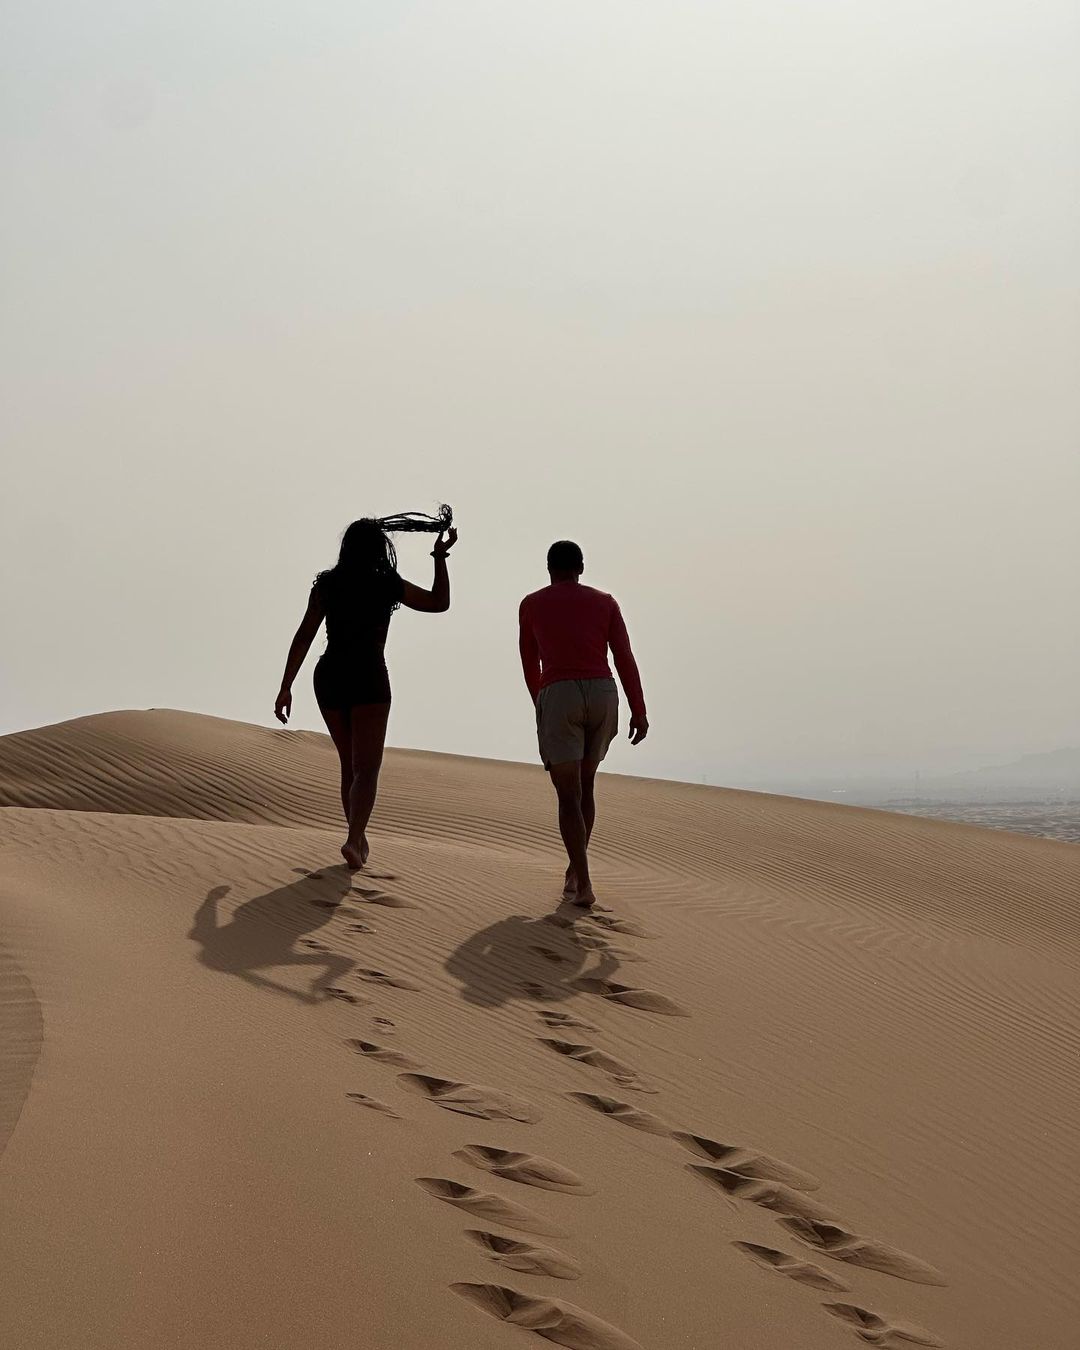 Steph Curry and Ayesha conquered some workouts in the desert dunes